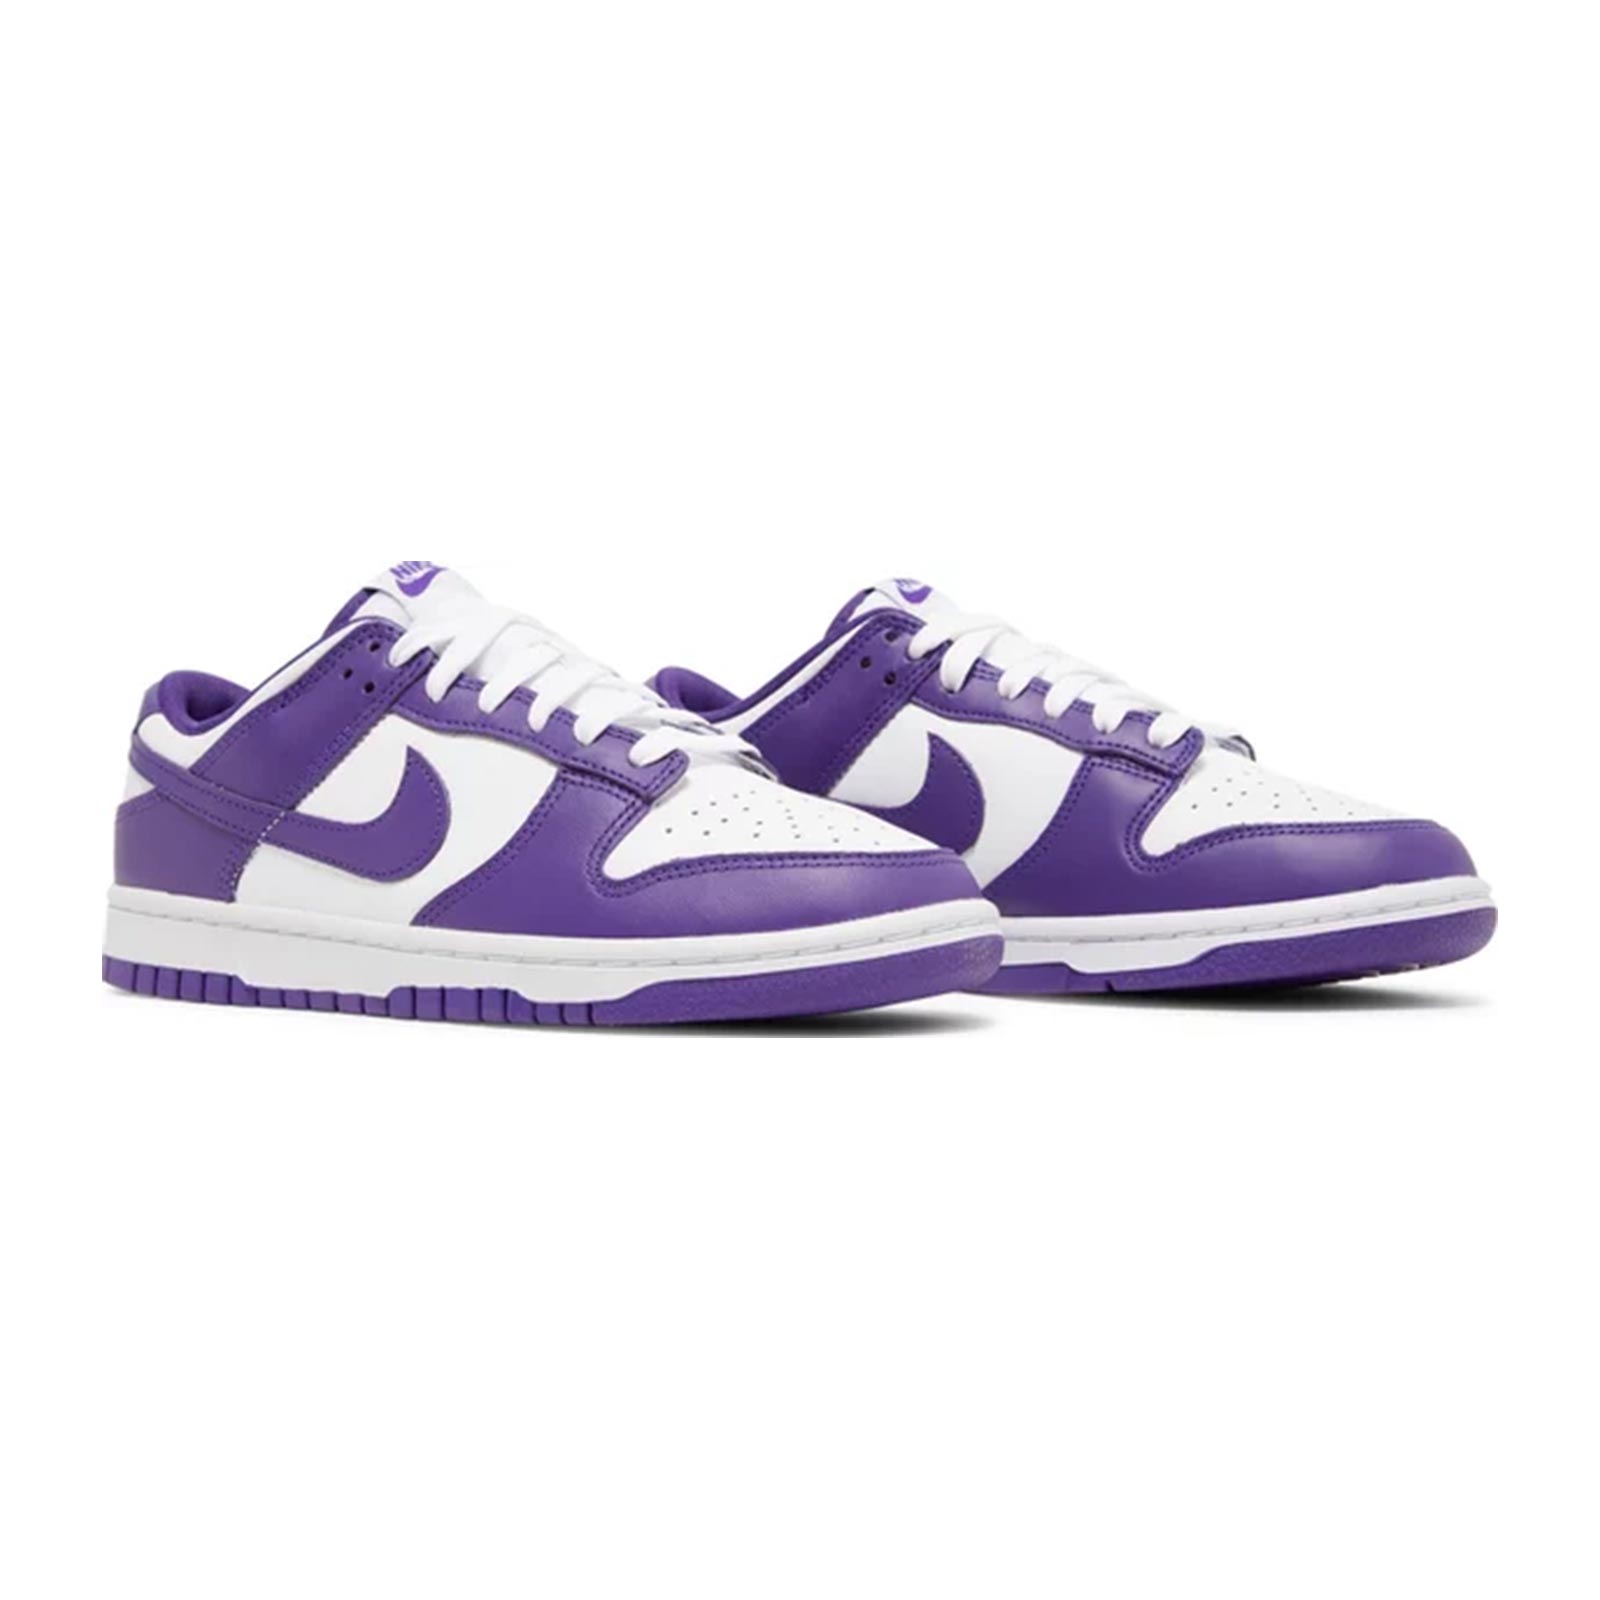 nike air maxim flower care instructions free